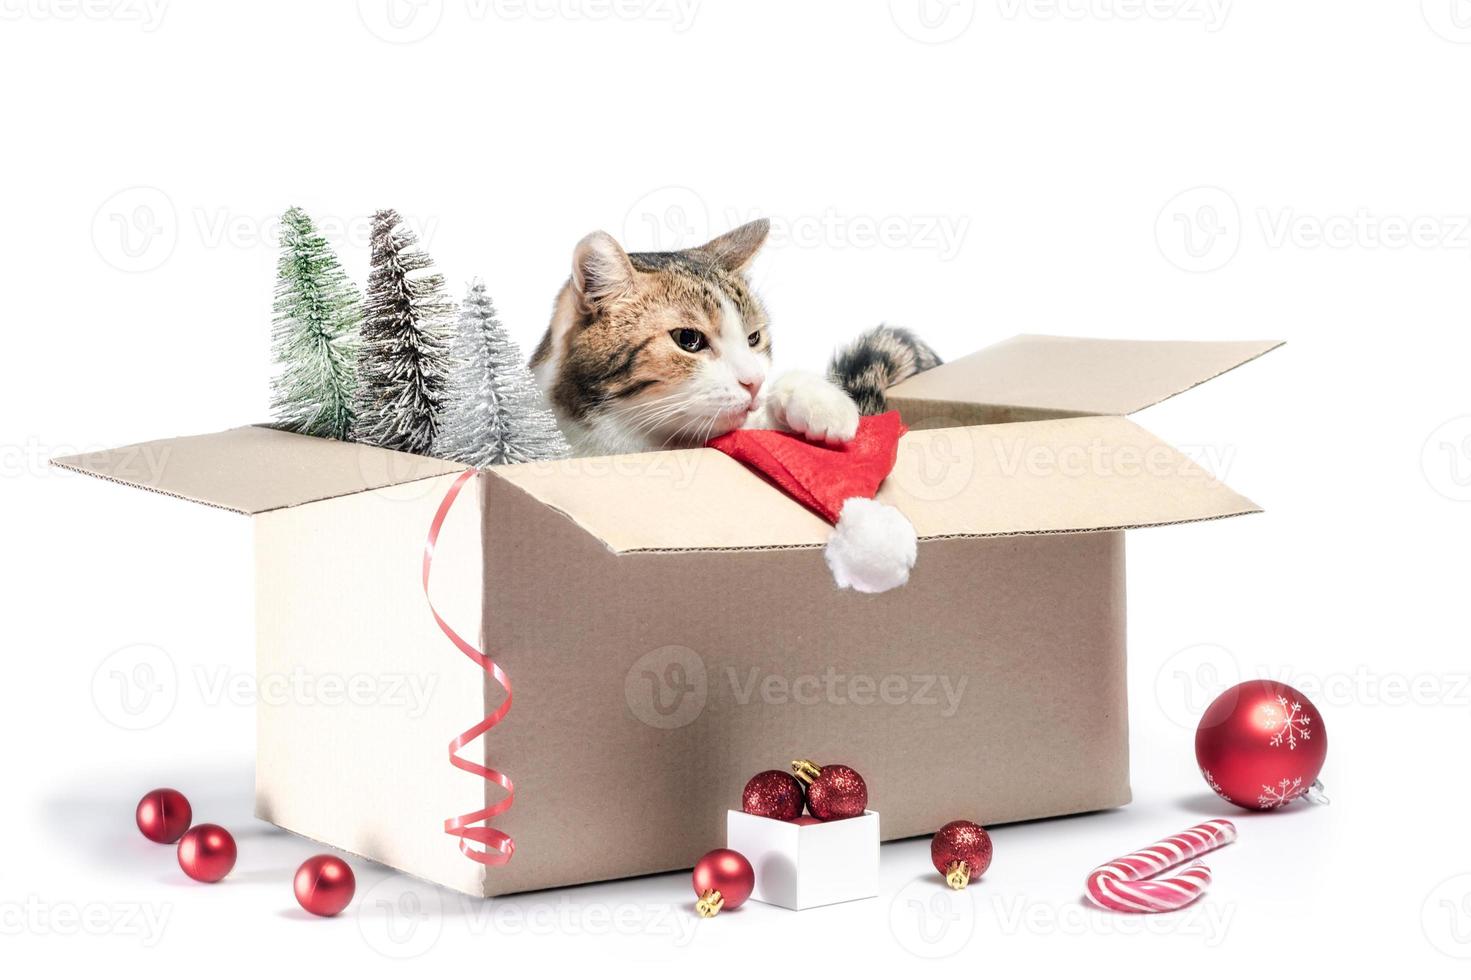 Cat in a box with Christmas decor photo